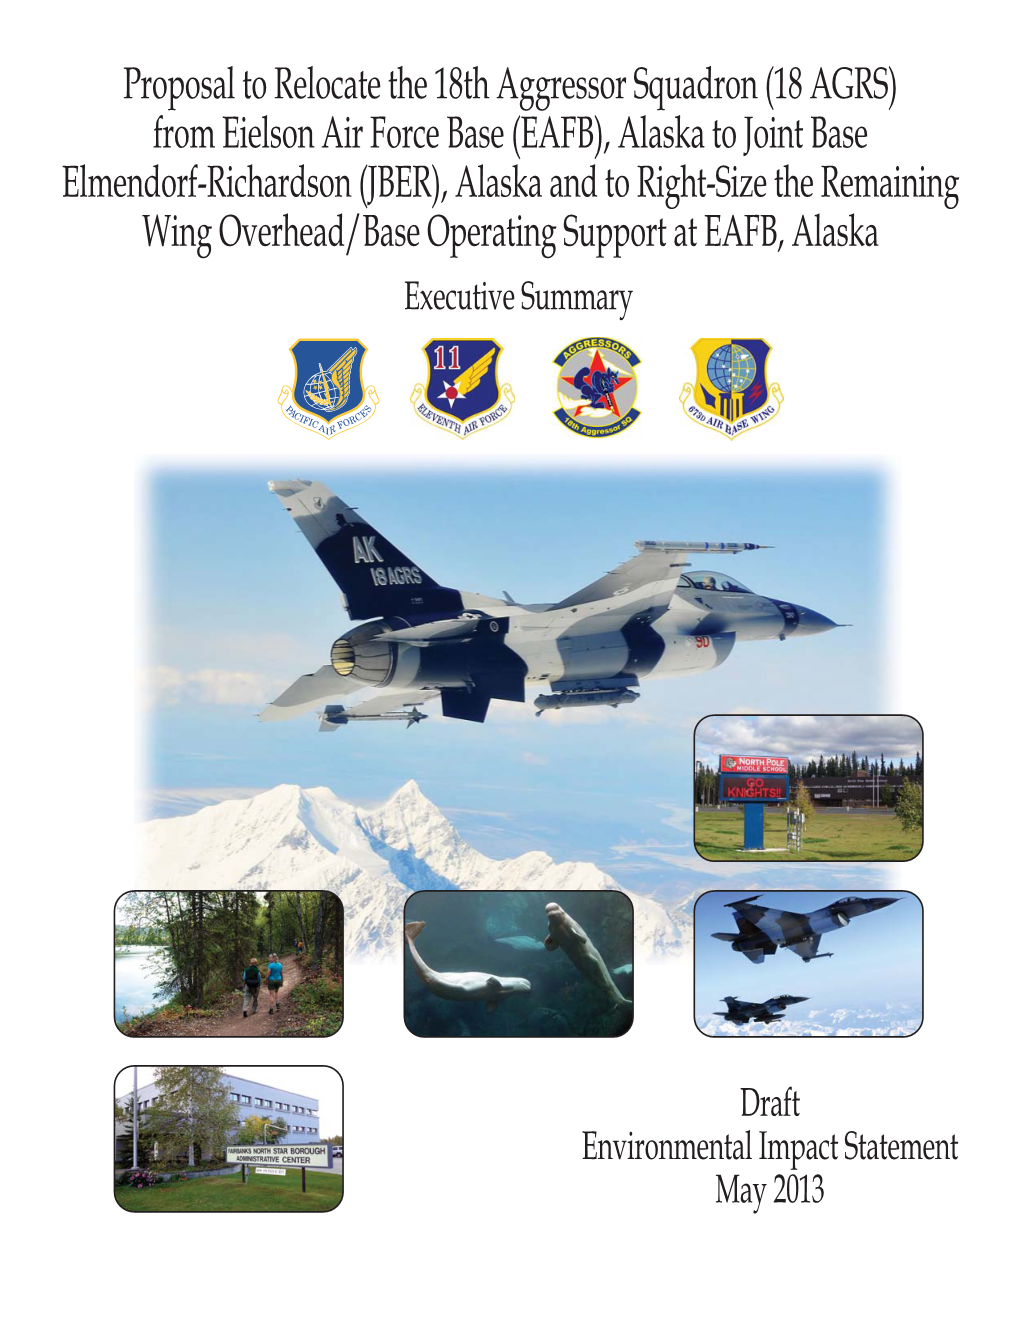 Proposal to Relocate the 18Th Aggressor Squadron (18 AGRS